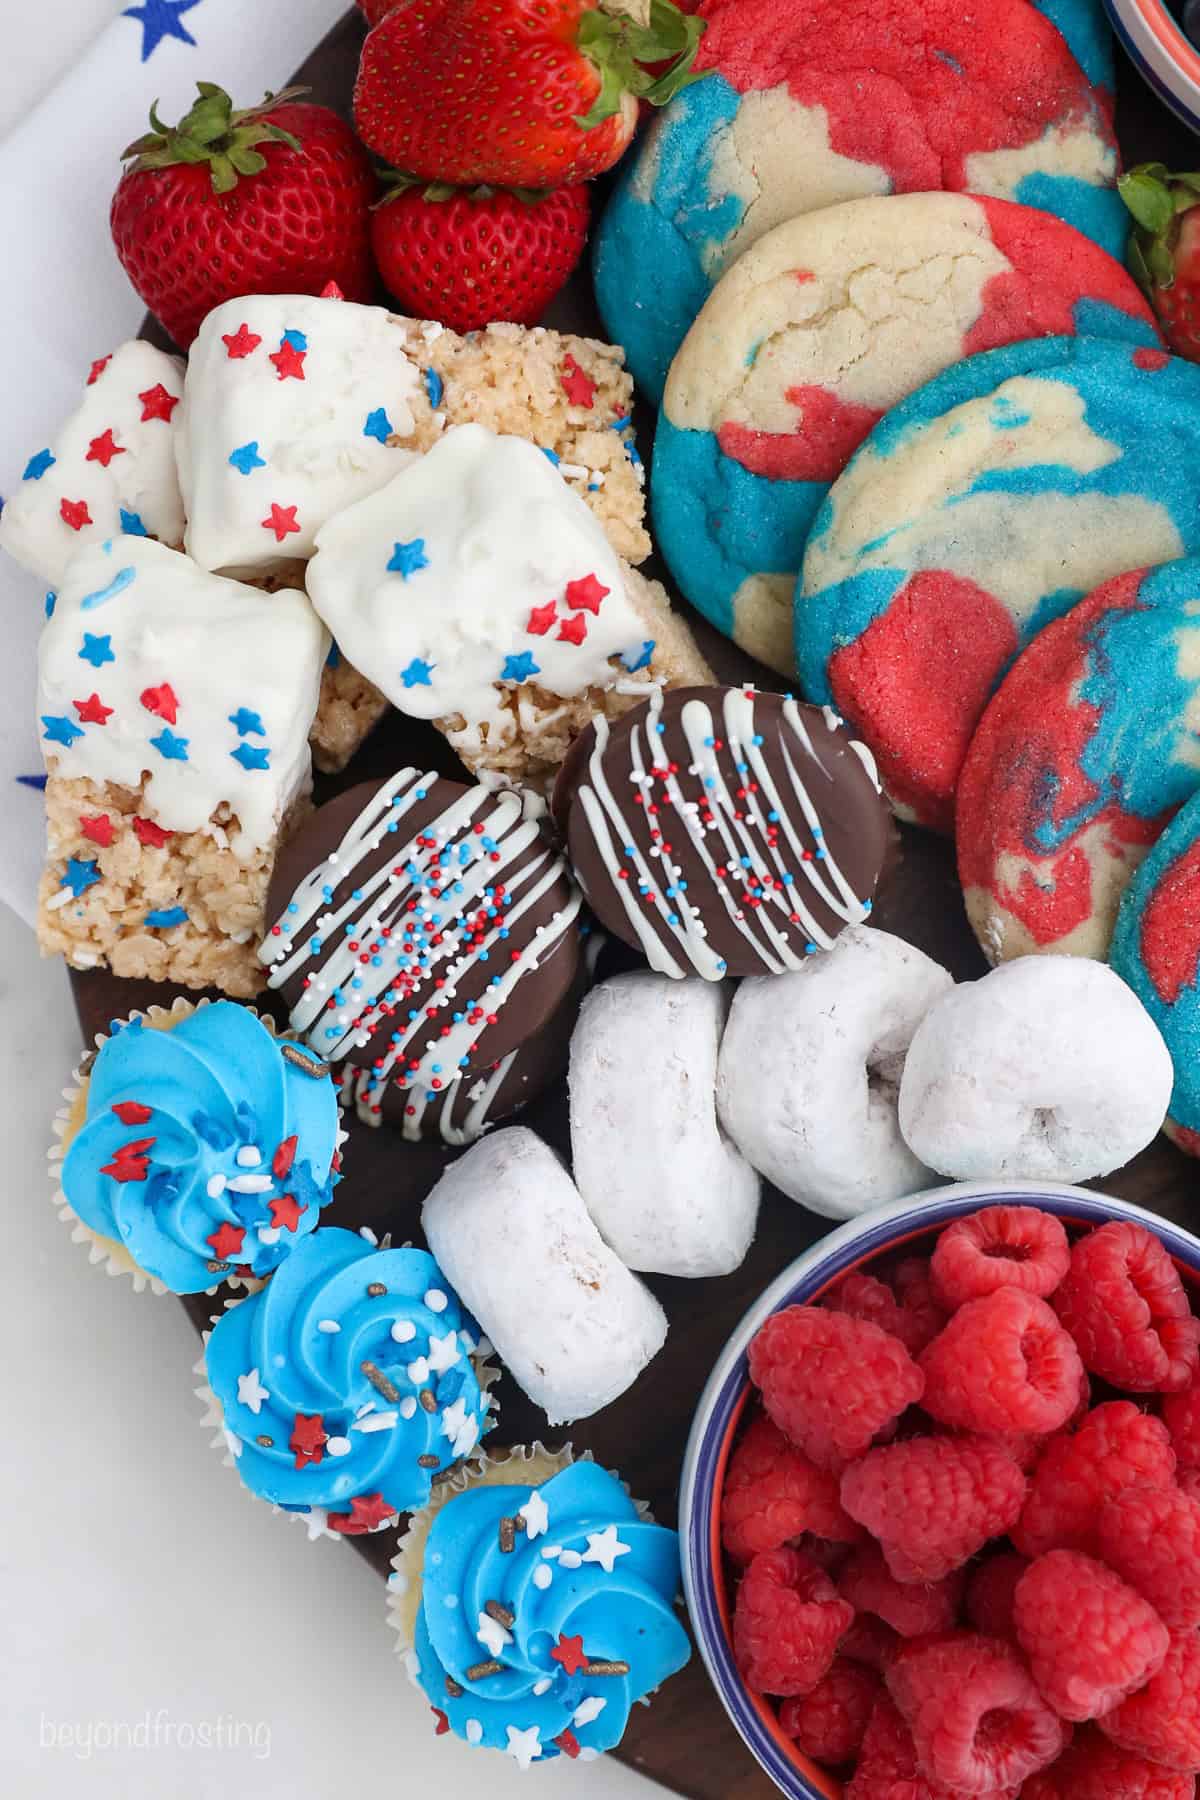 Overhead view of a 4th of July dessert board with red, white, and blue themed cookies, donuts, fruit, and other treats.